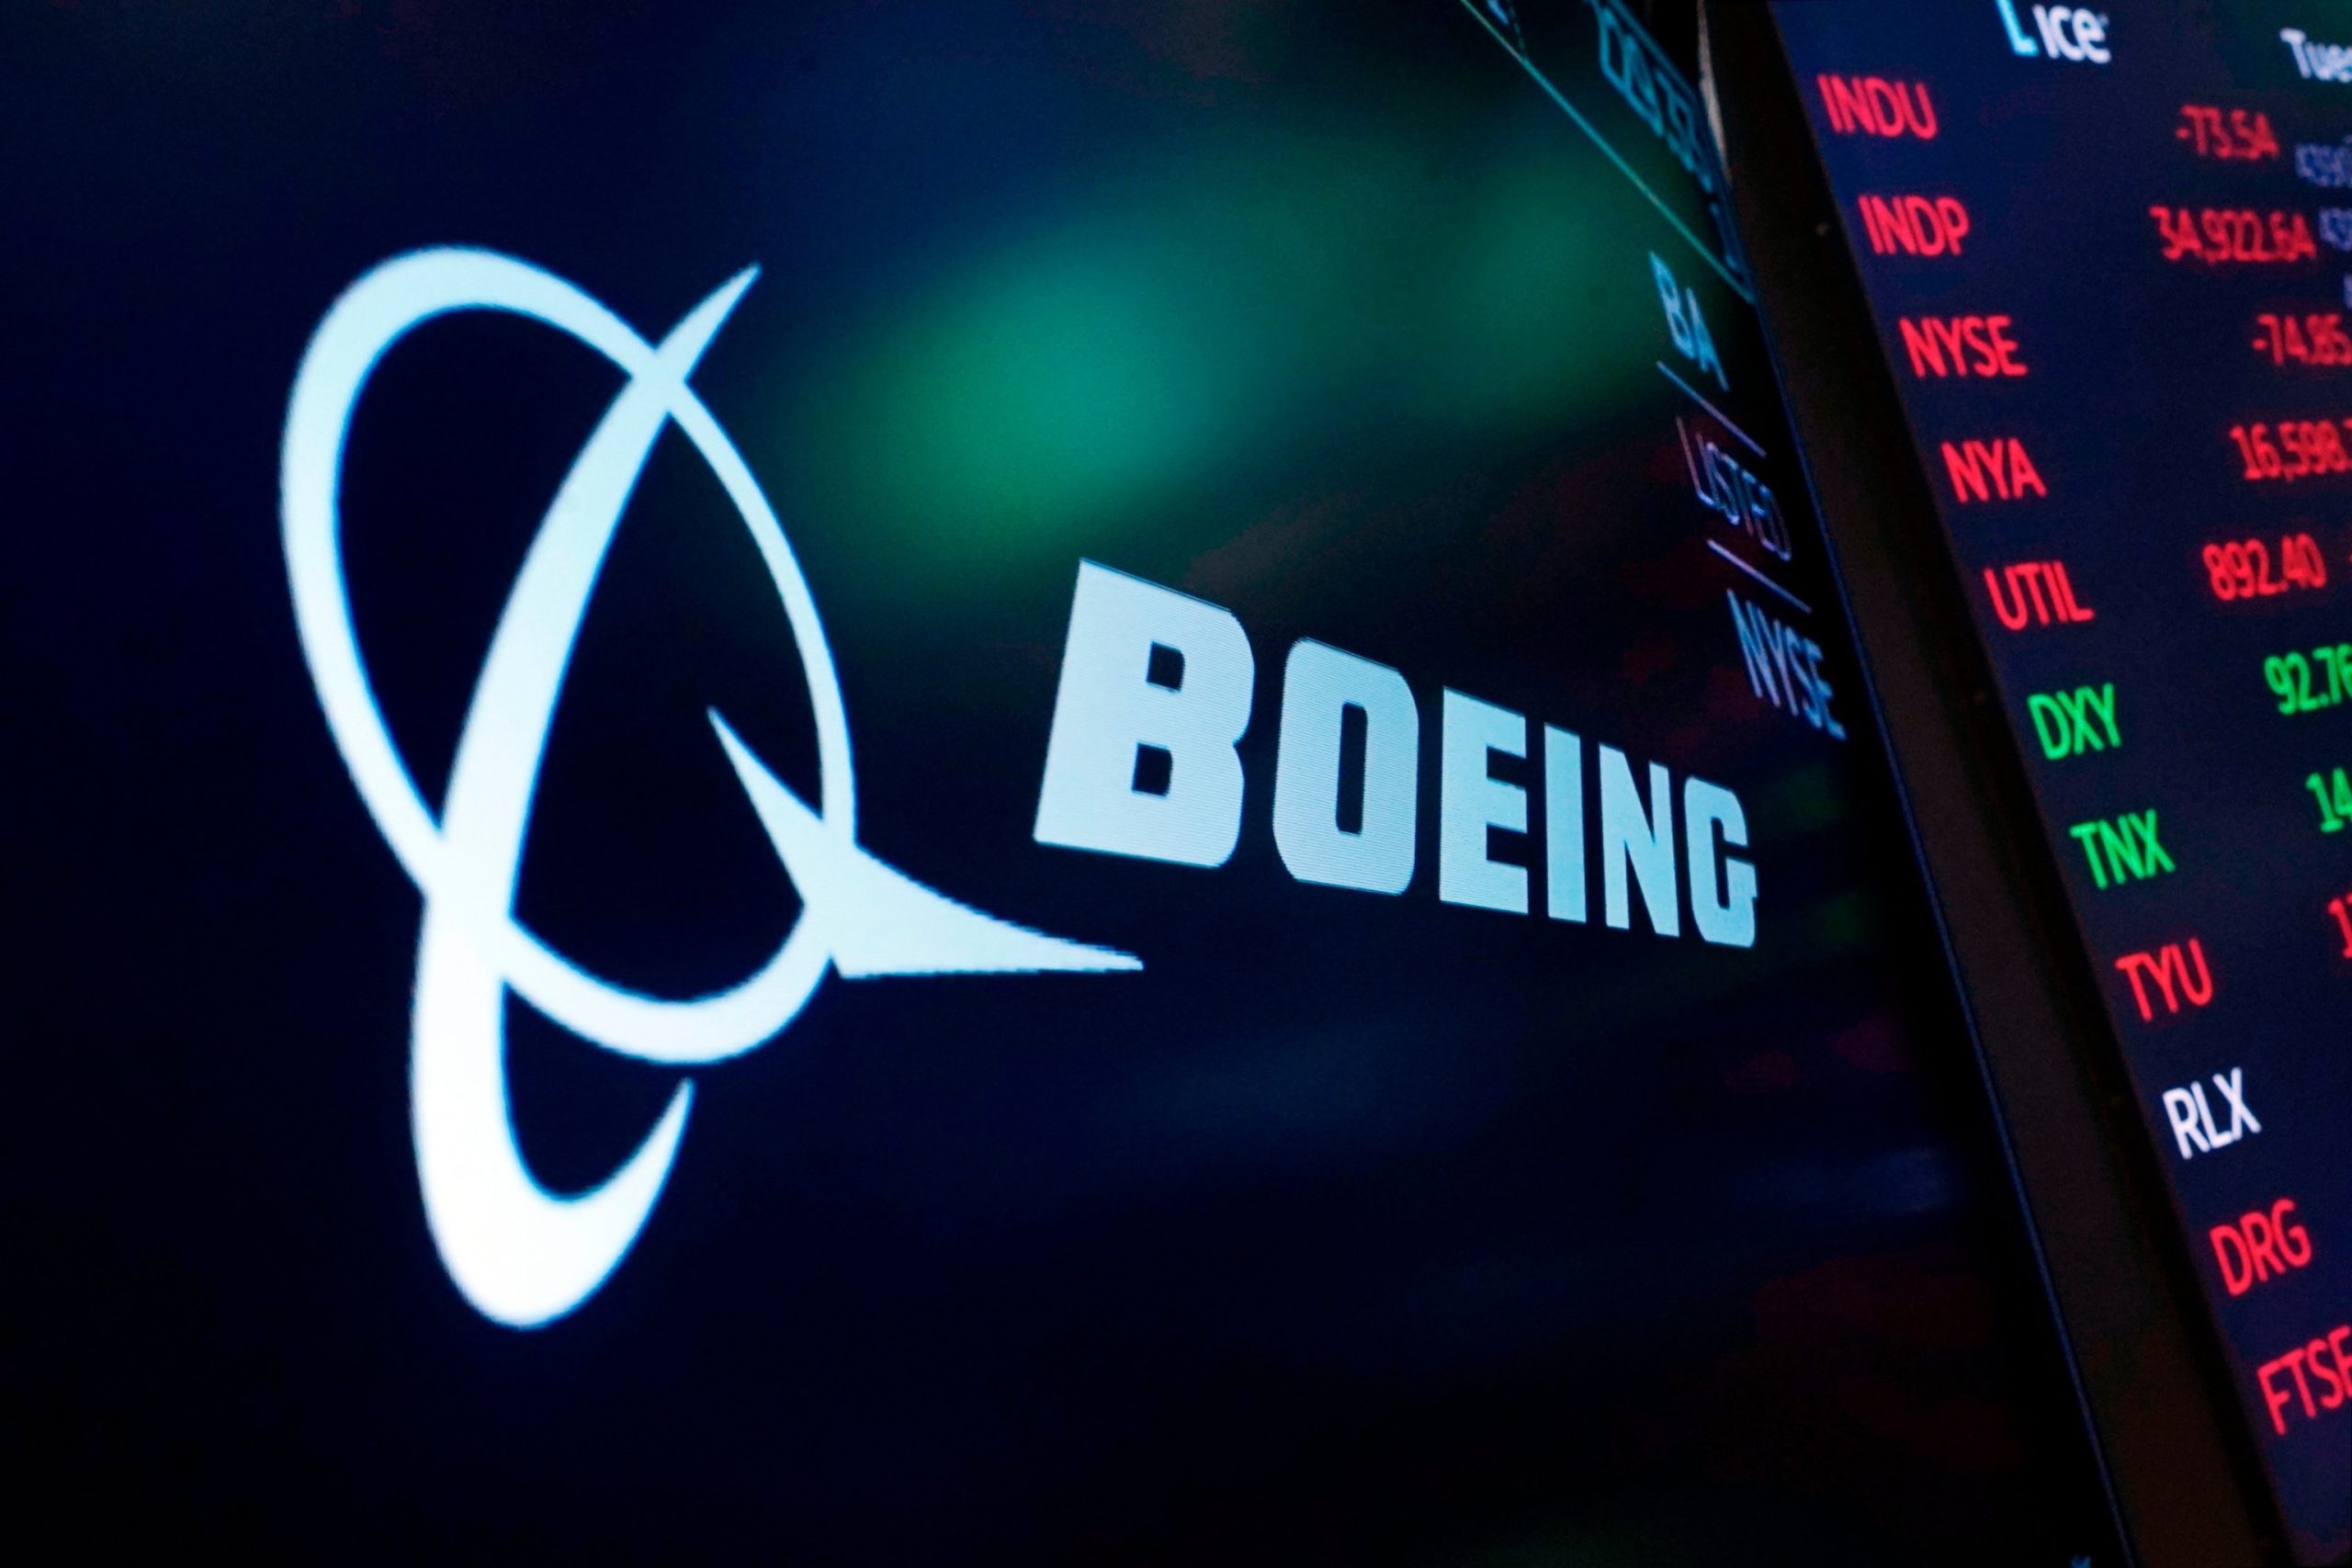 FAA Implements Enhanced Oversight on Boeing Production Following Alaska Airlines Incident